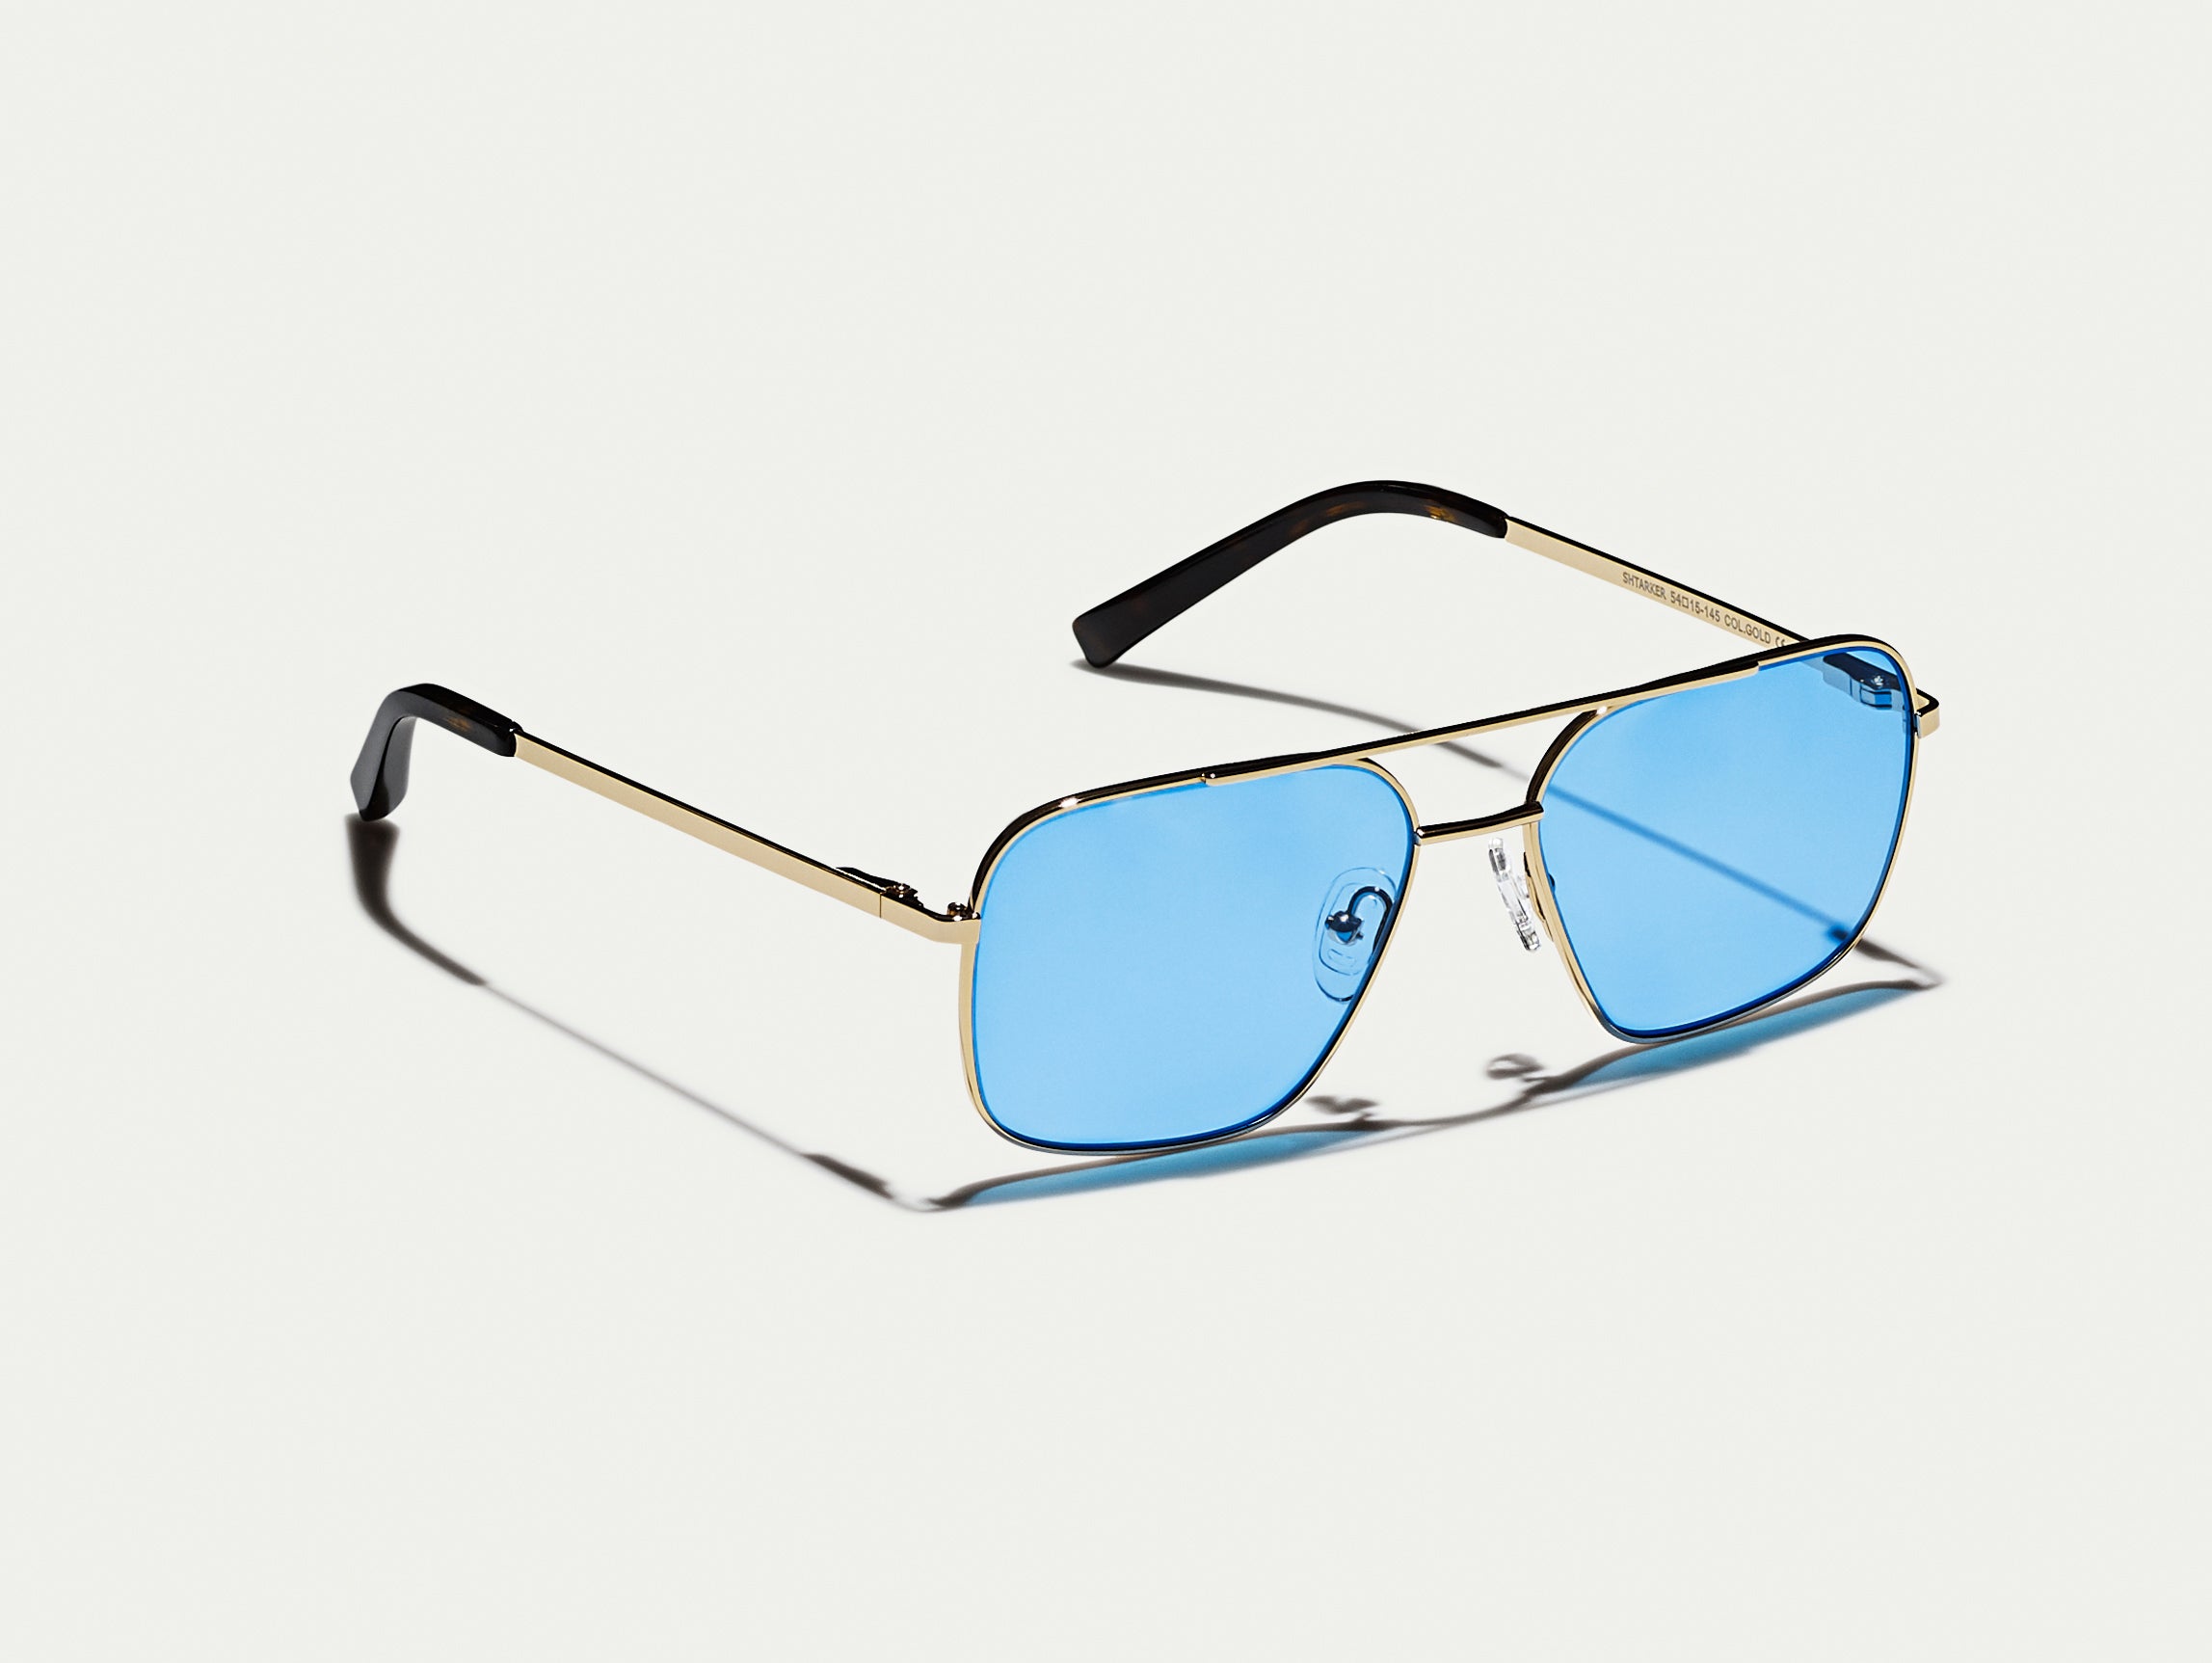 The SHTARKER in Gold with Celebrity Blue Tinted Lenses